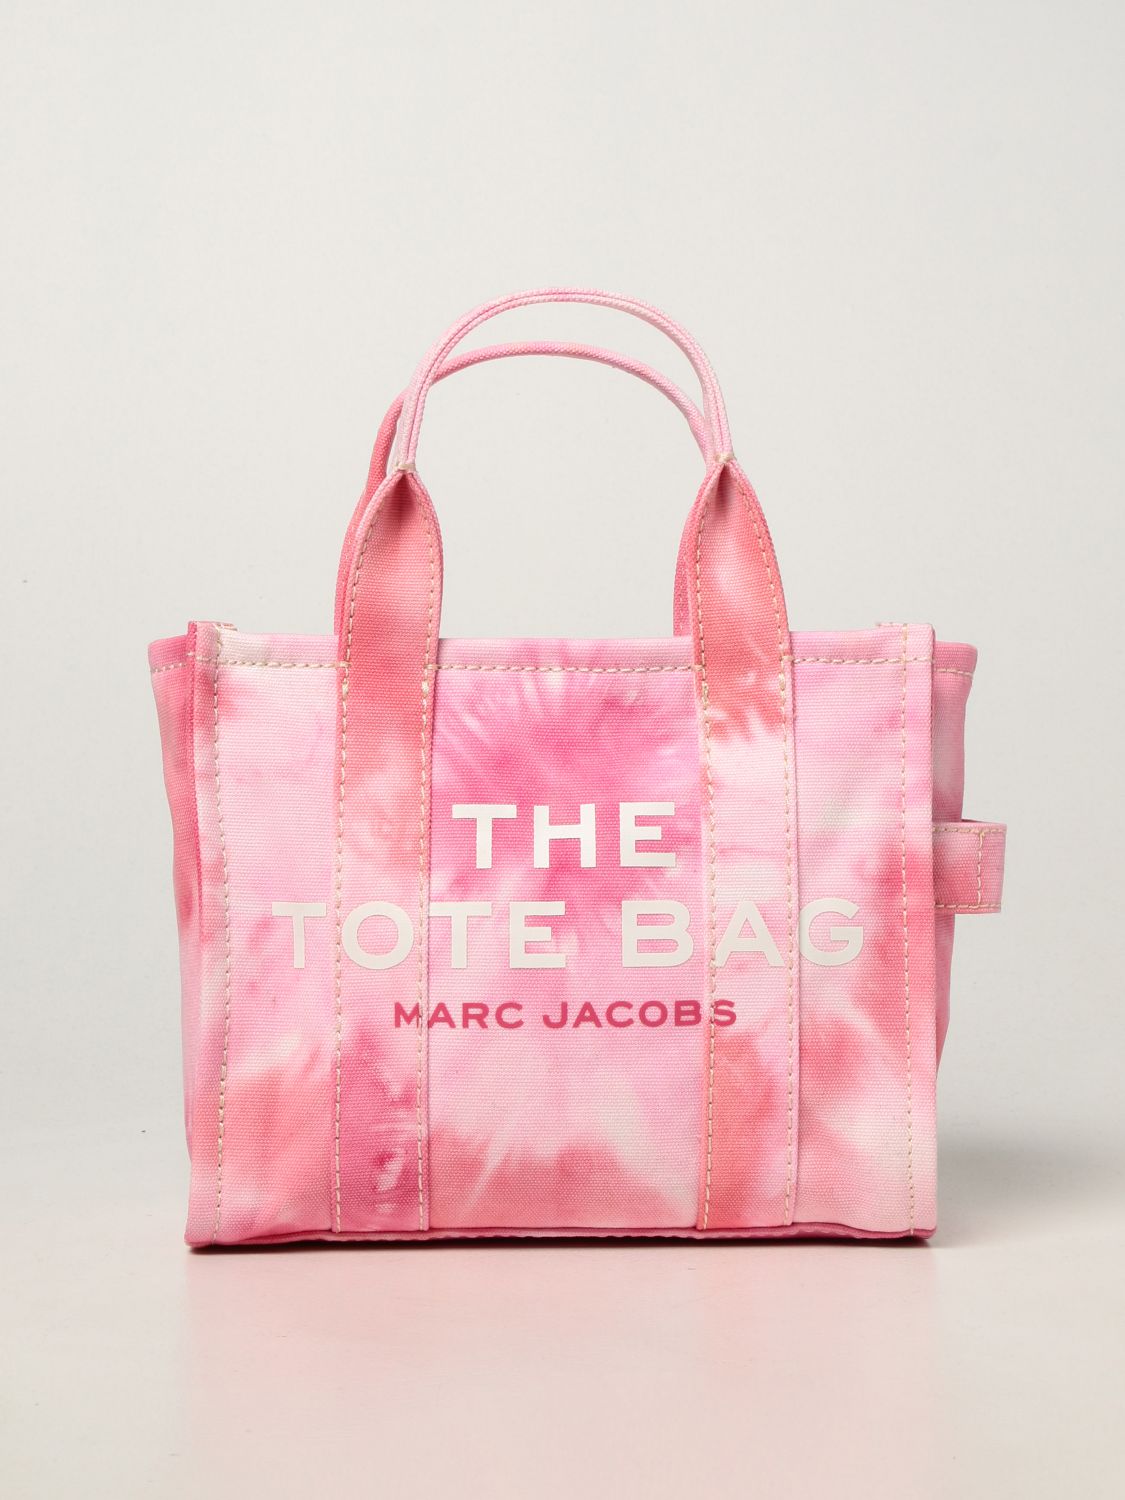 The Marc Jacobs Tote Bag in tie dye canvas